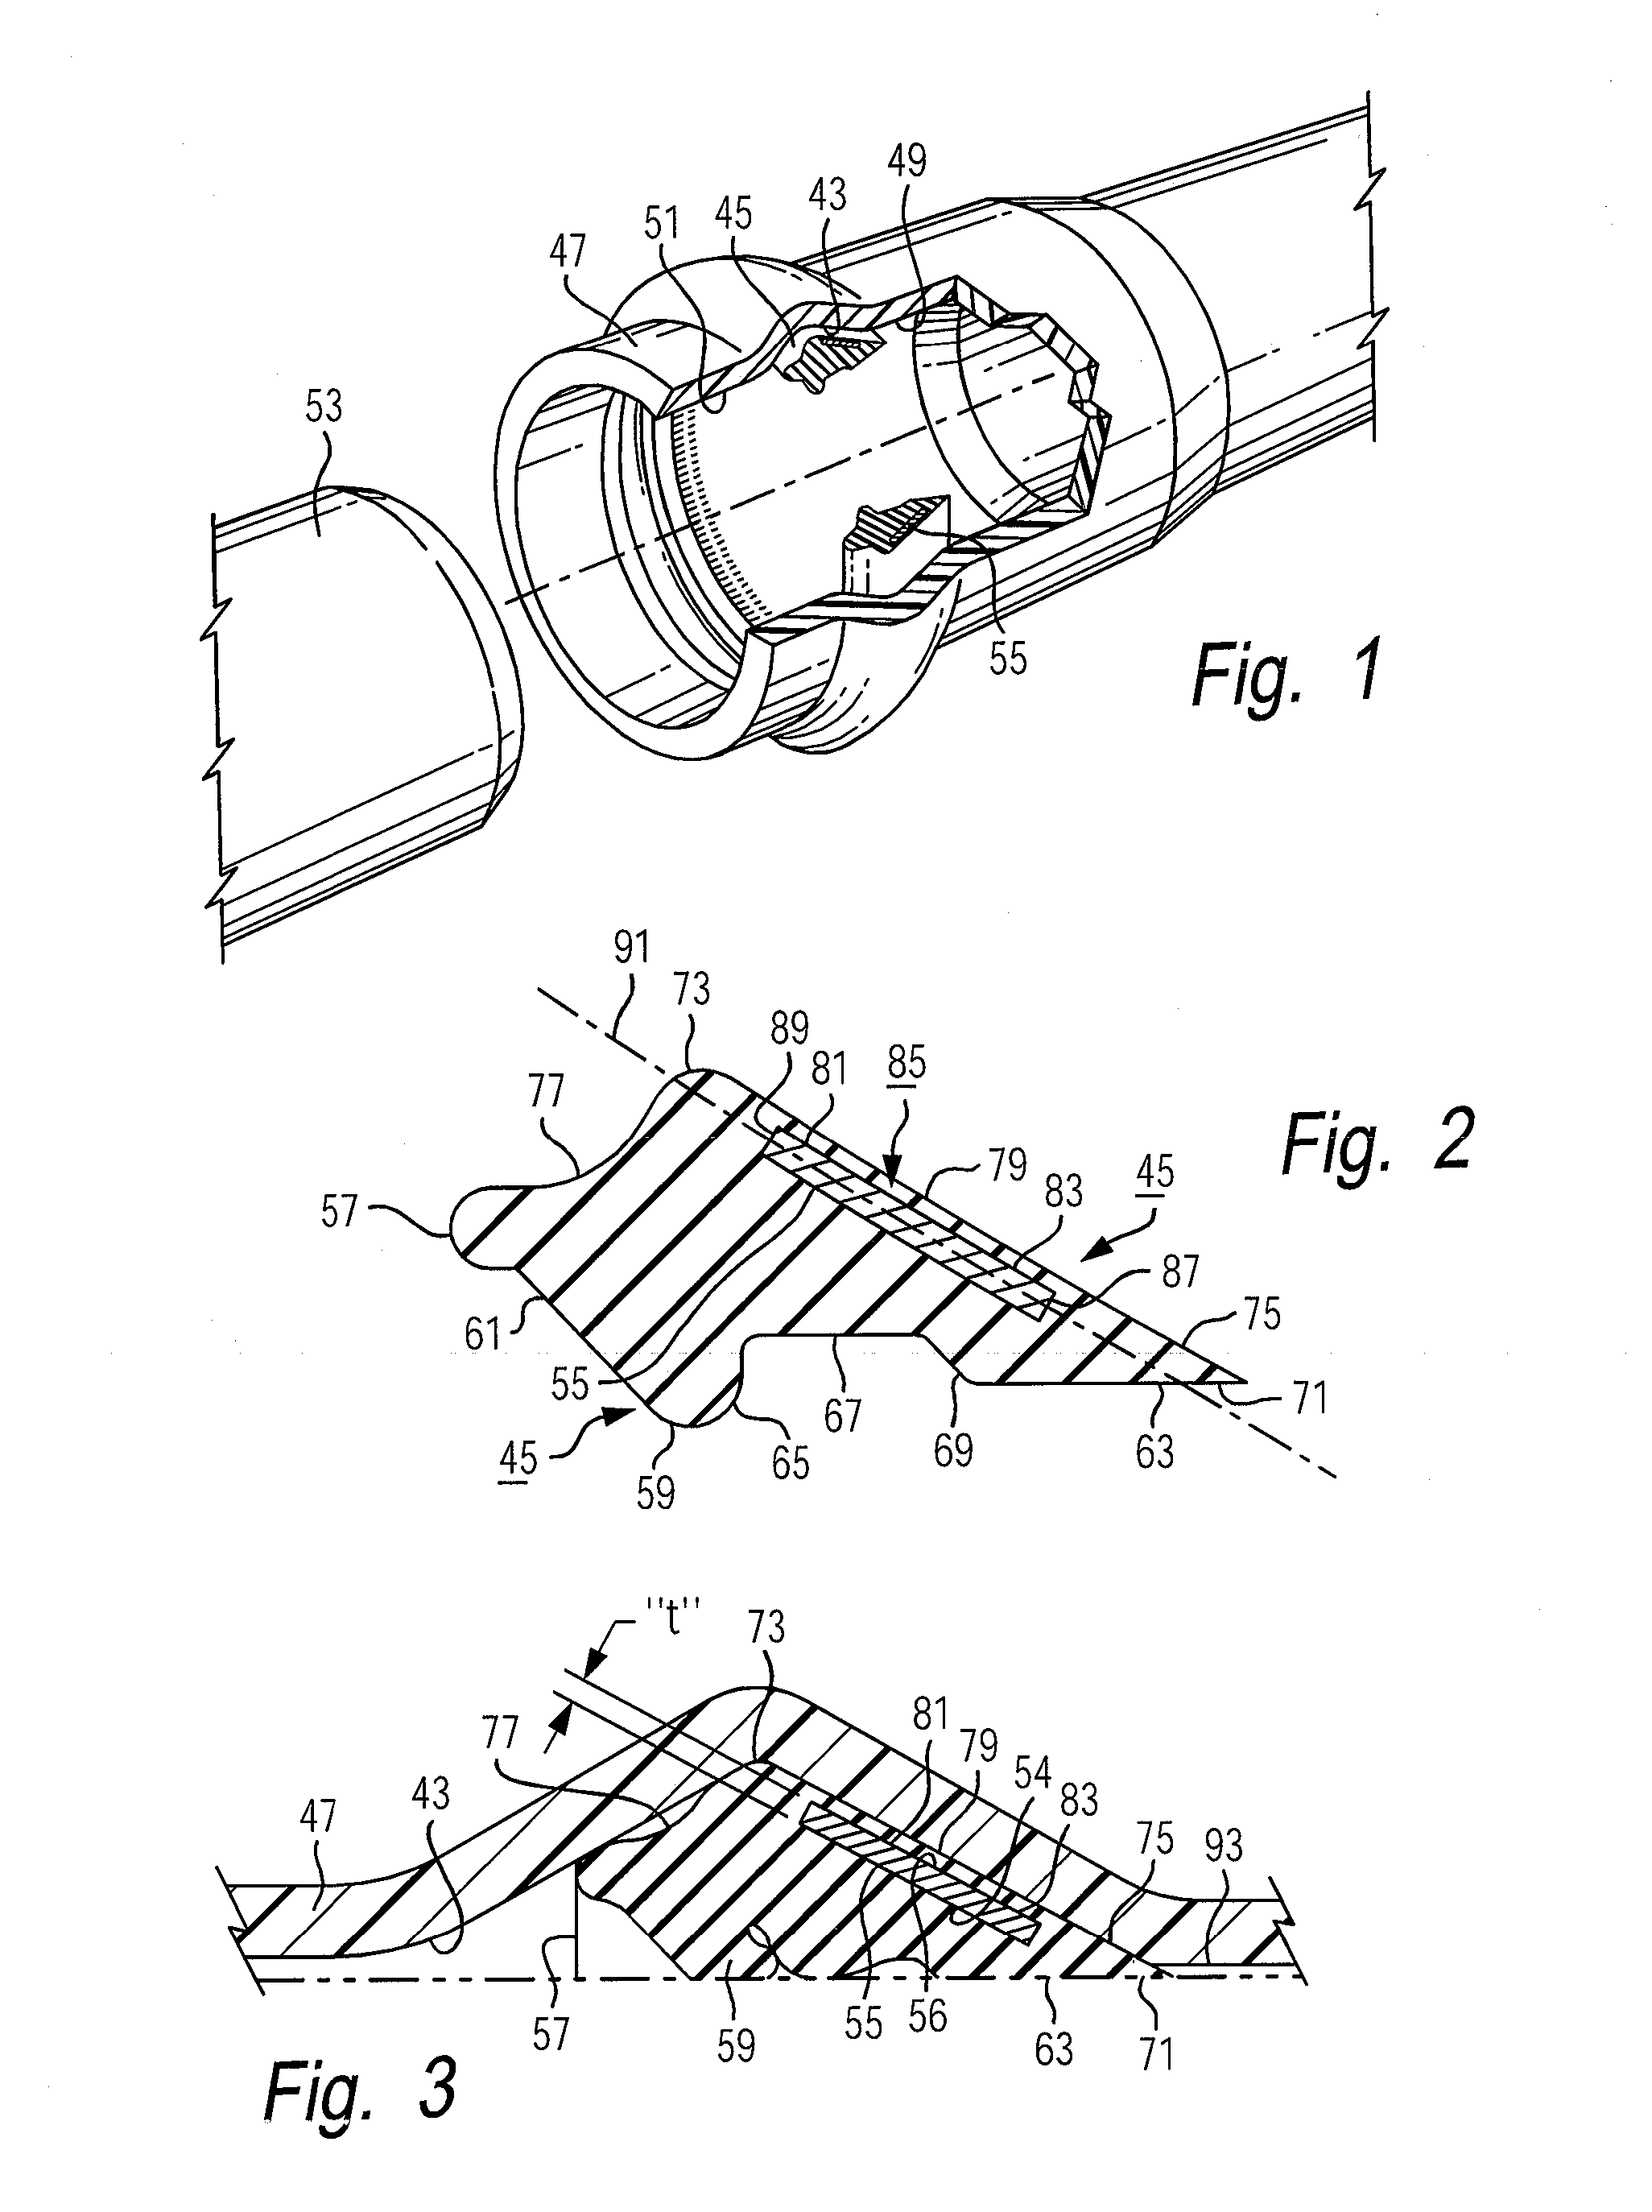 Method of Manufacturing a Pipe Gasket